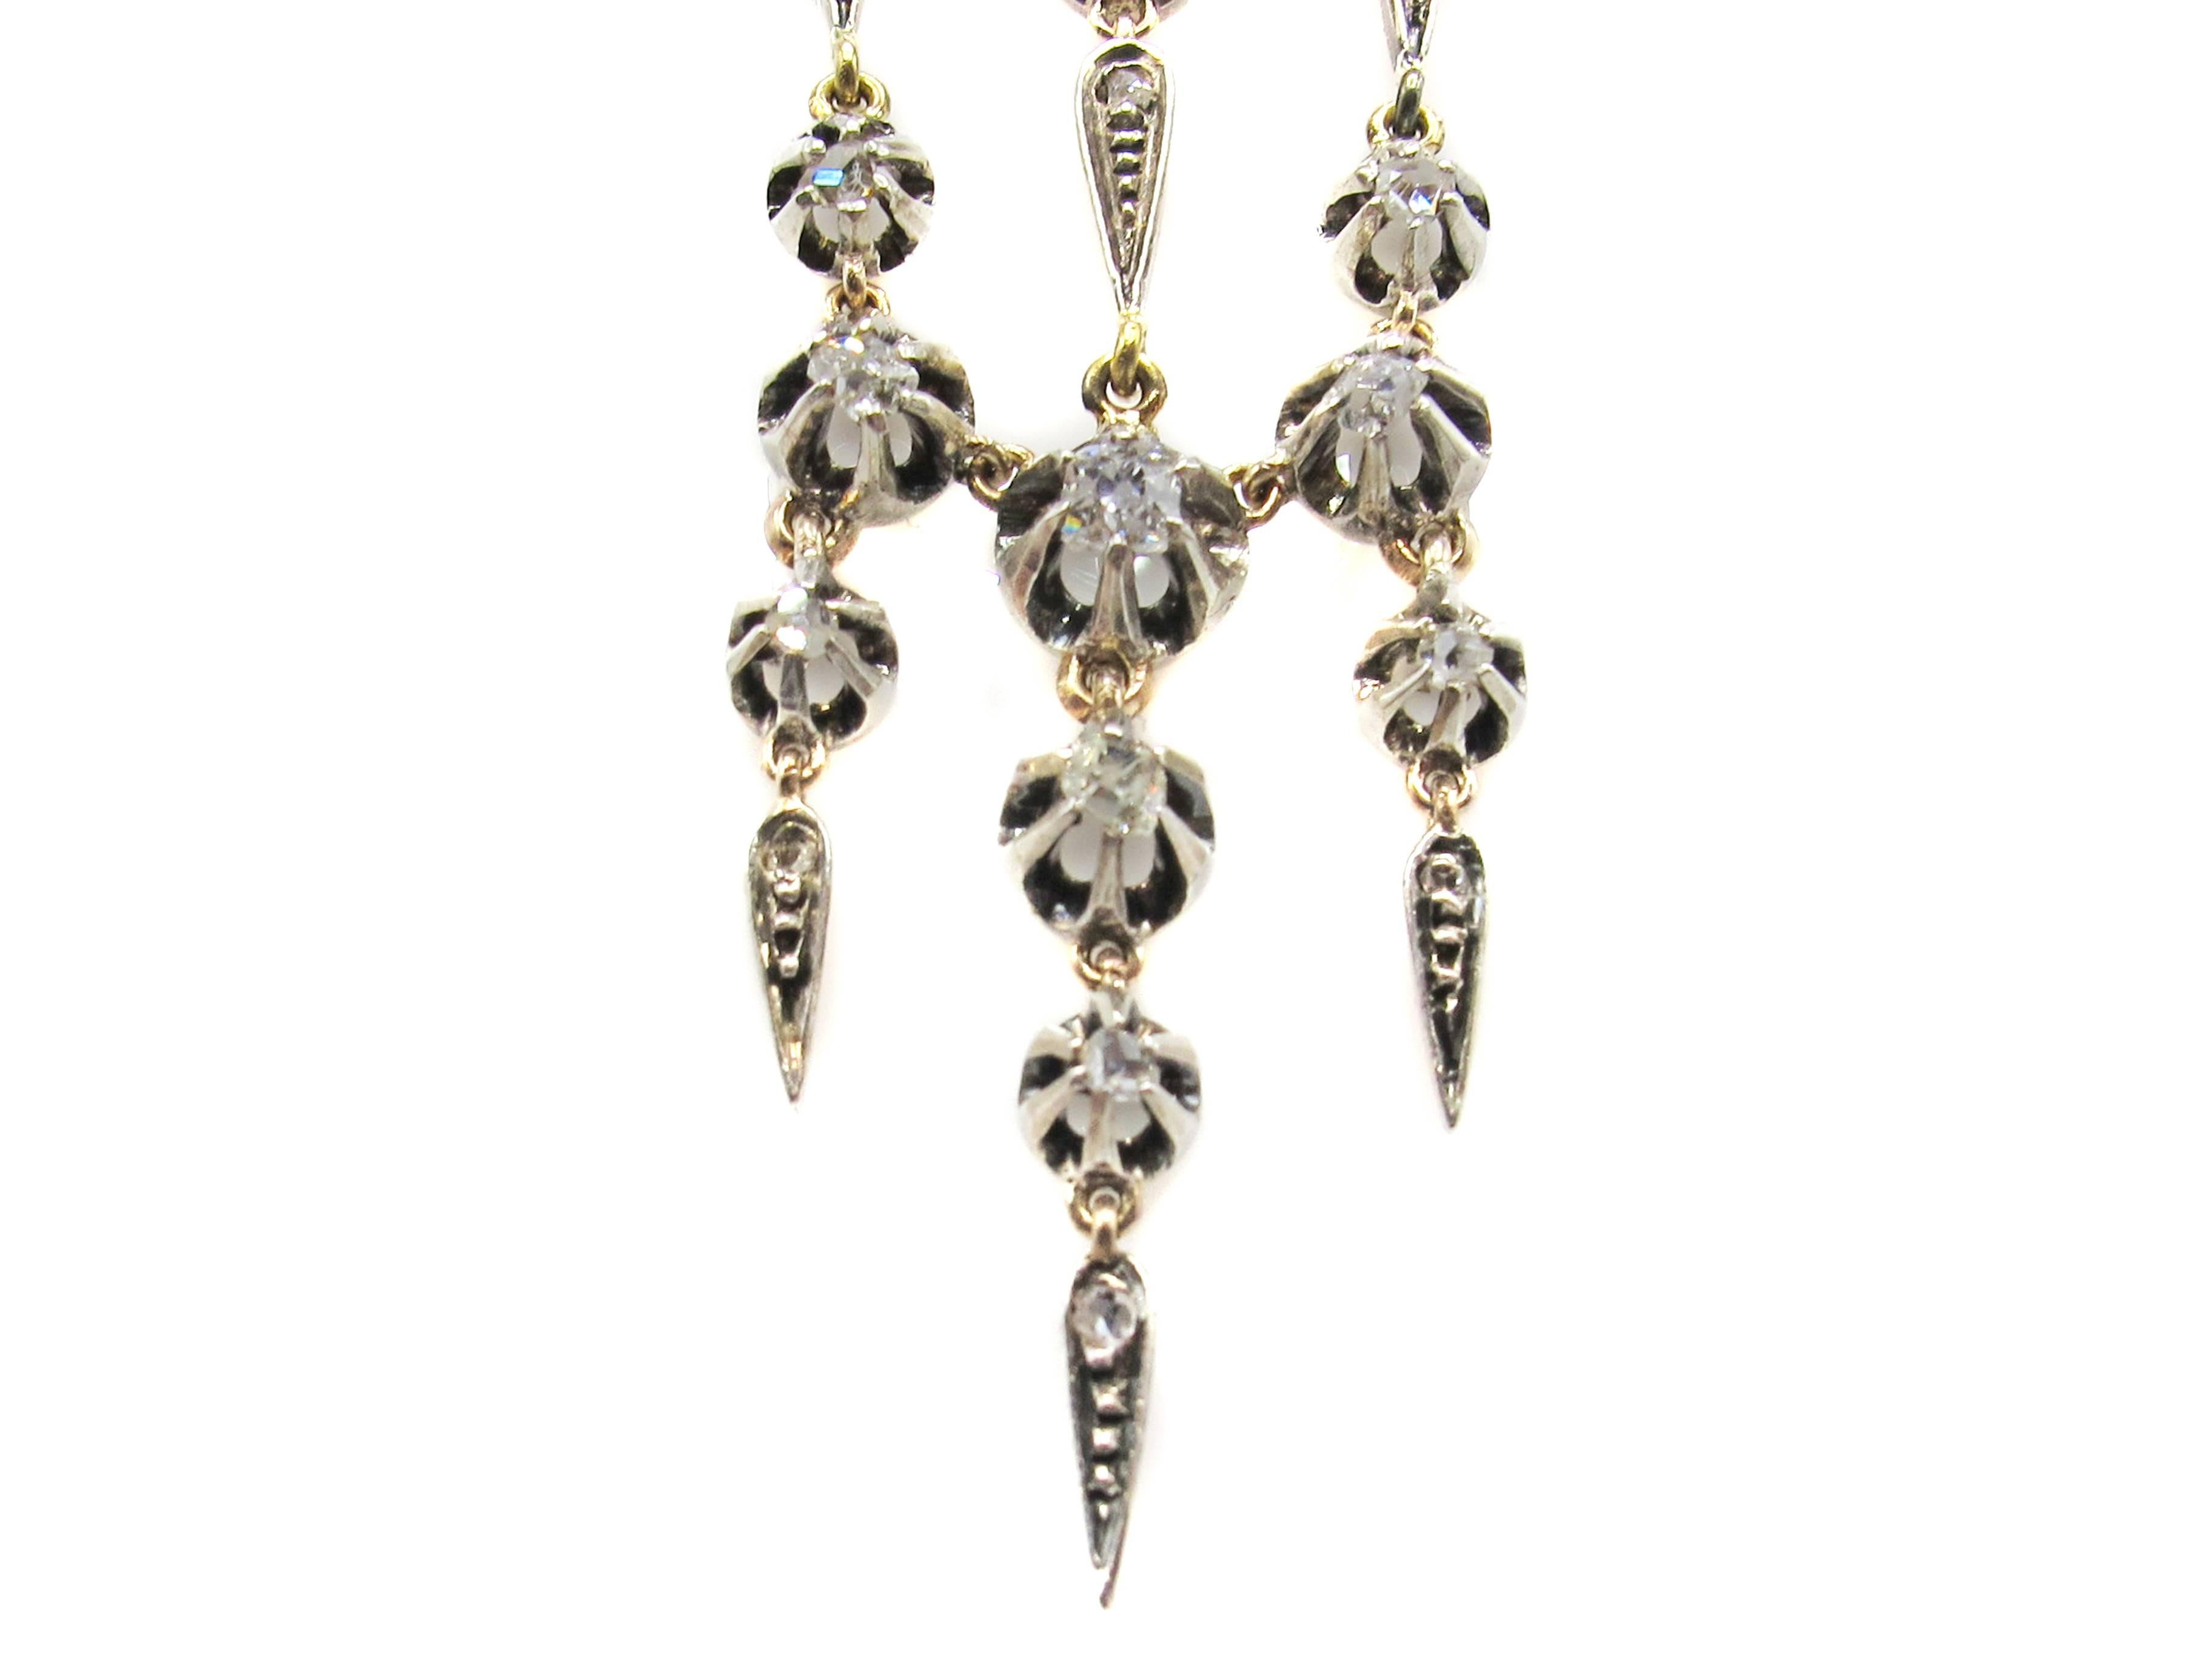 These unique early Victorian chandelier pendant earrings measure an impressive 3.75 inches in length from the middle of the hook to the bottom of the earring. Each old mine diamond is held by 5 extended silver prongs which rest on a base of rose